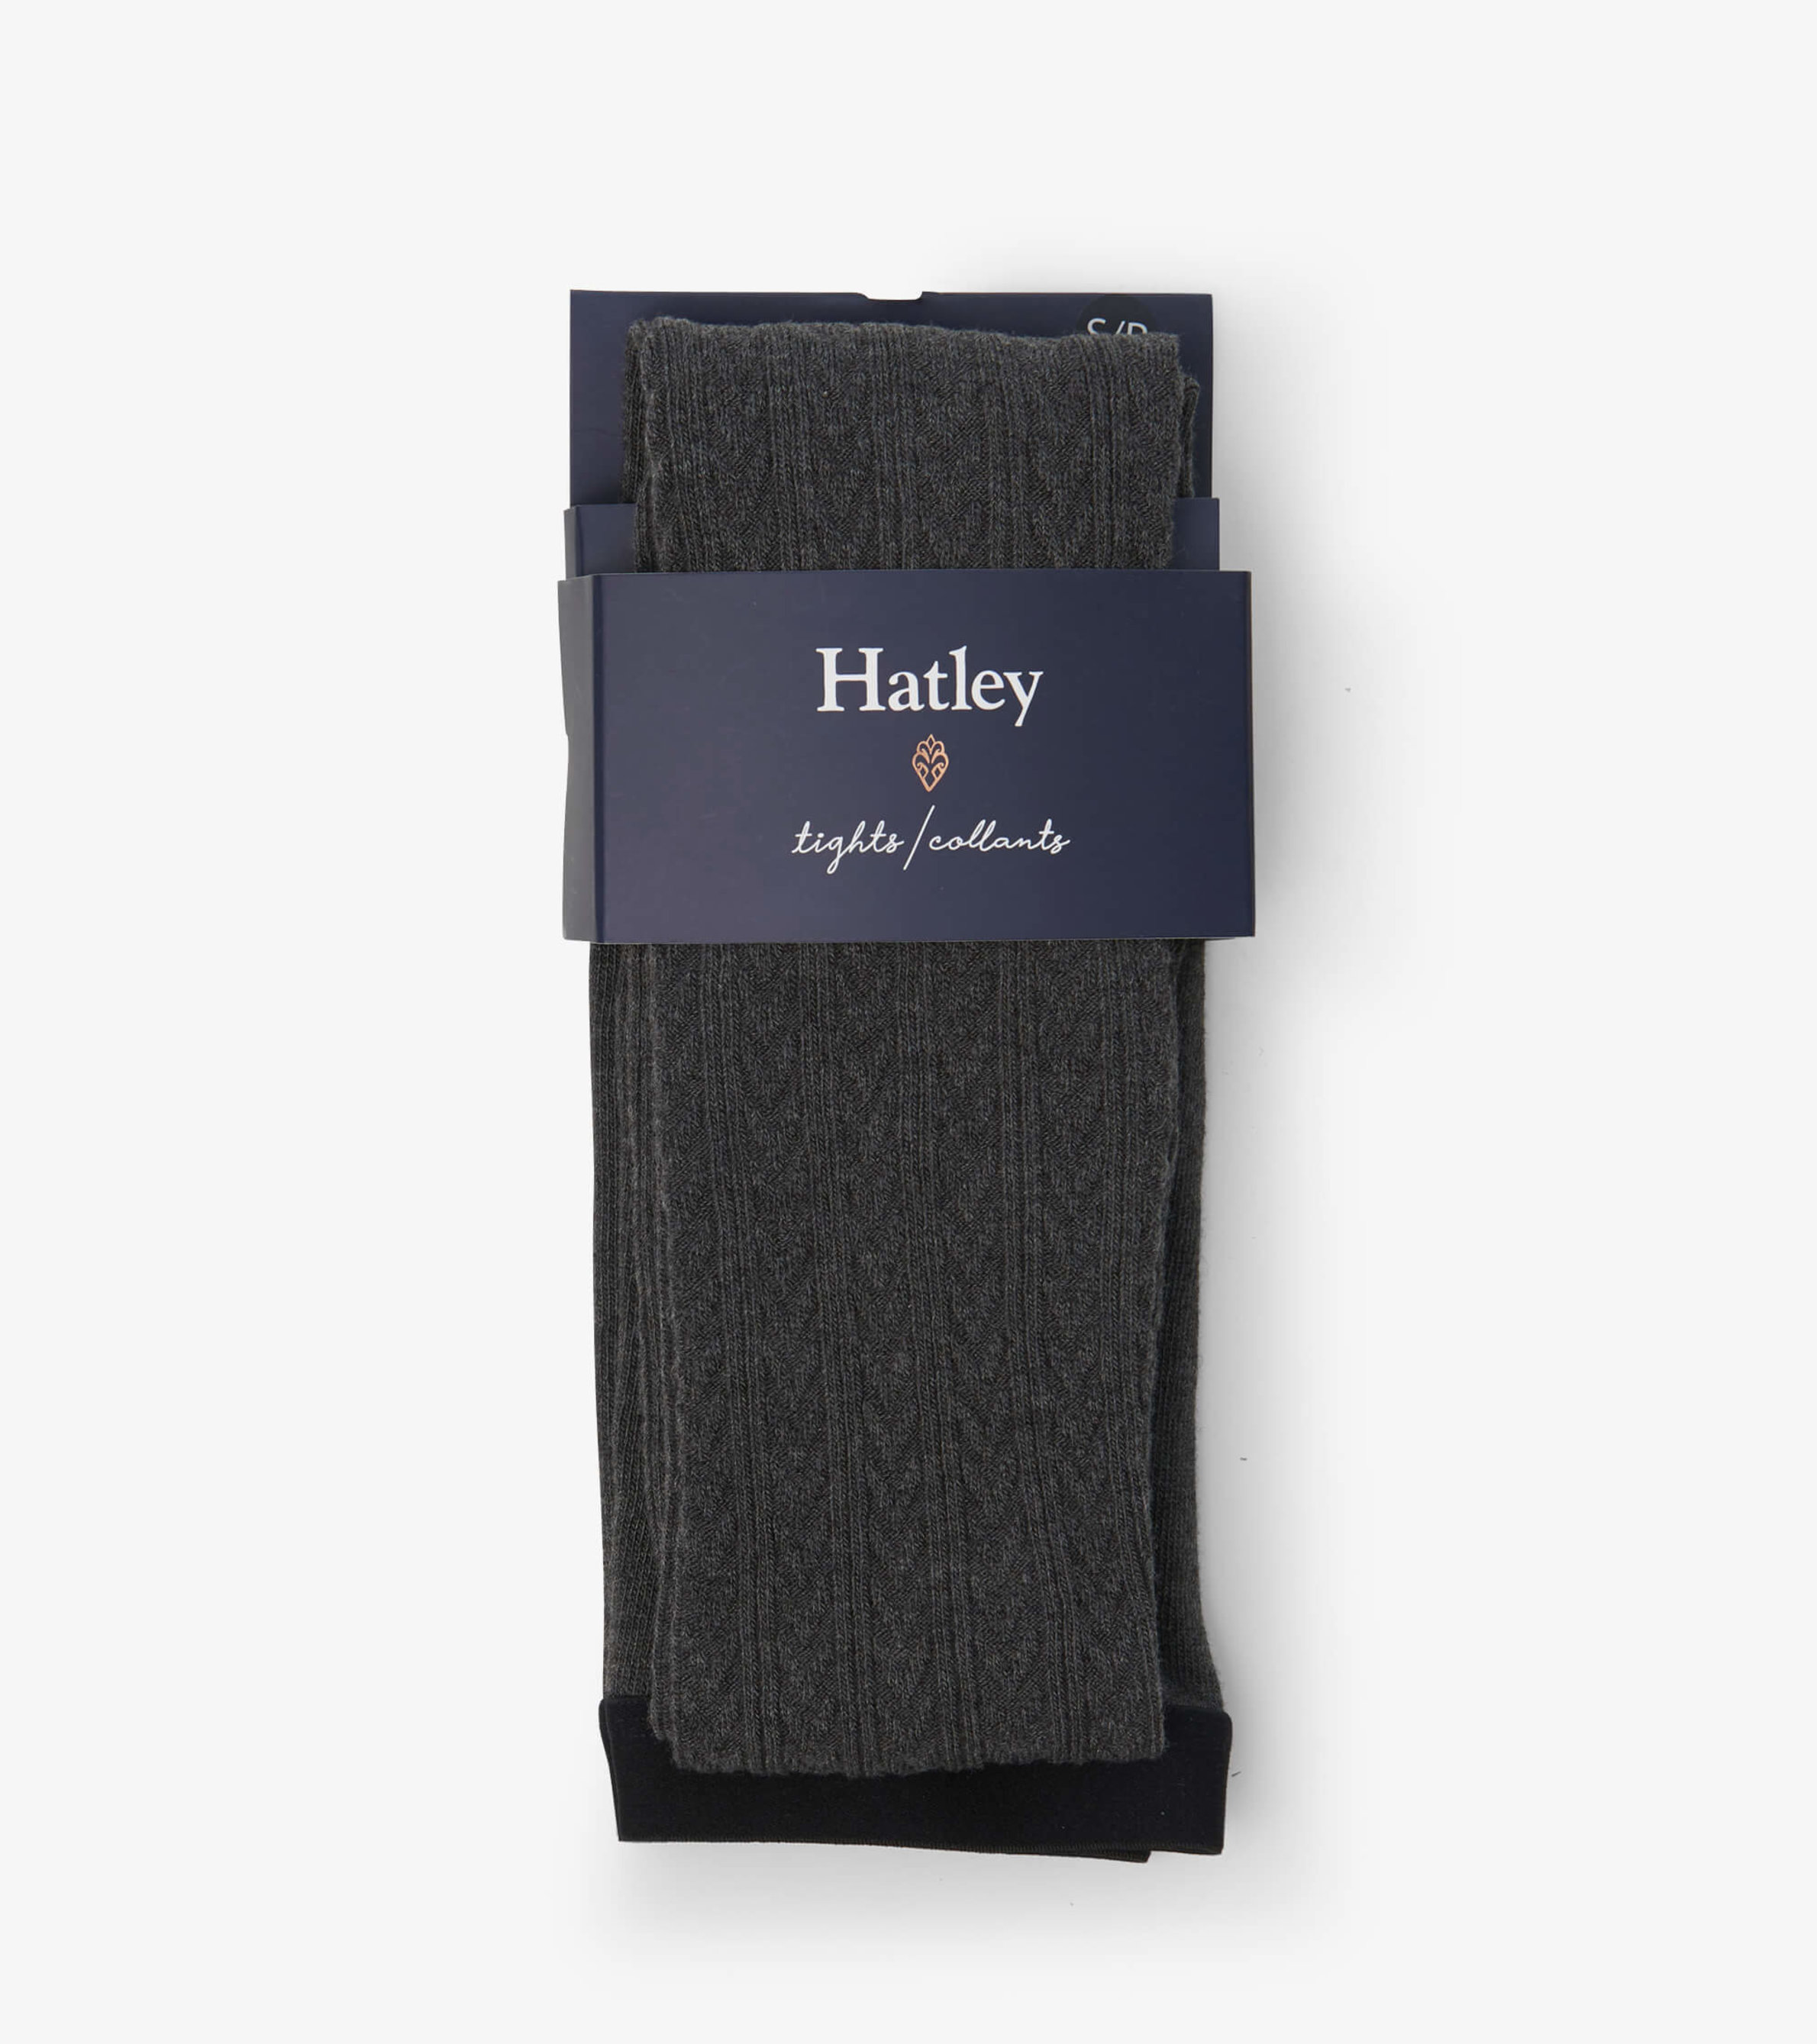 Buy Charcoal Grey Cotton Rich Cable Tights from the Next UK online shop